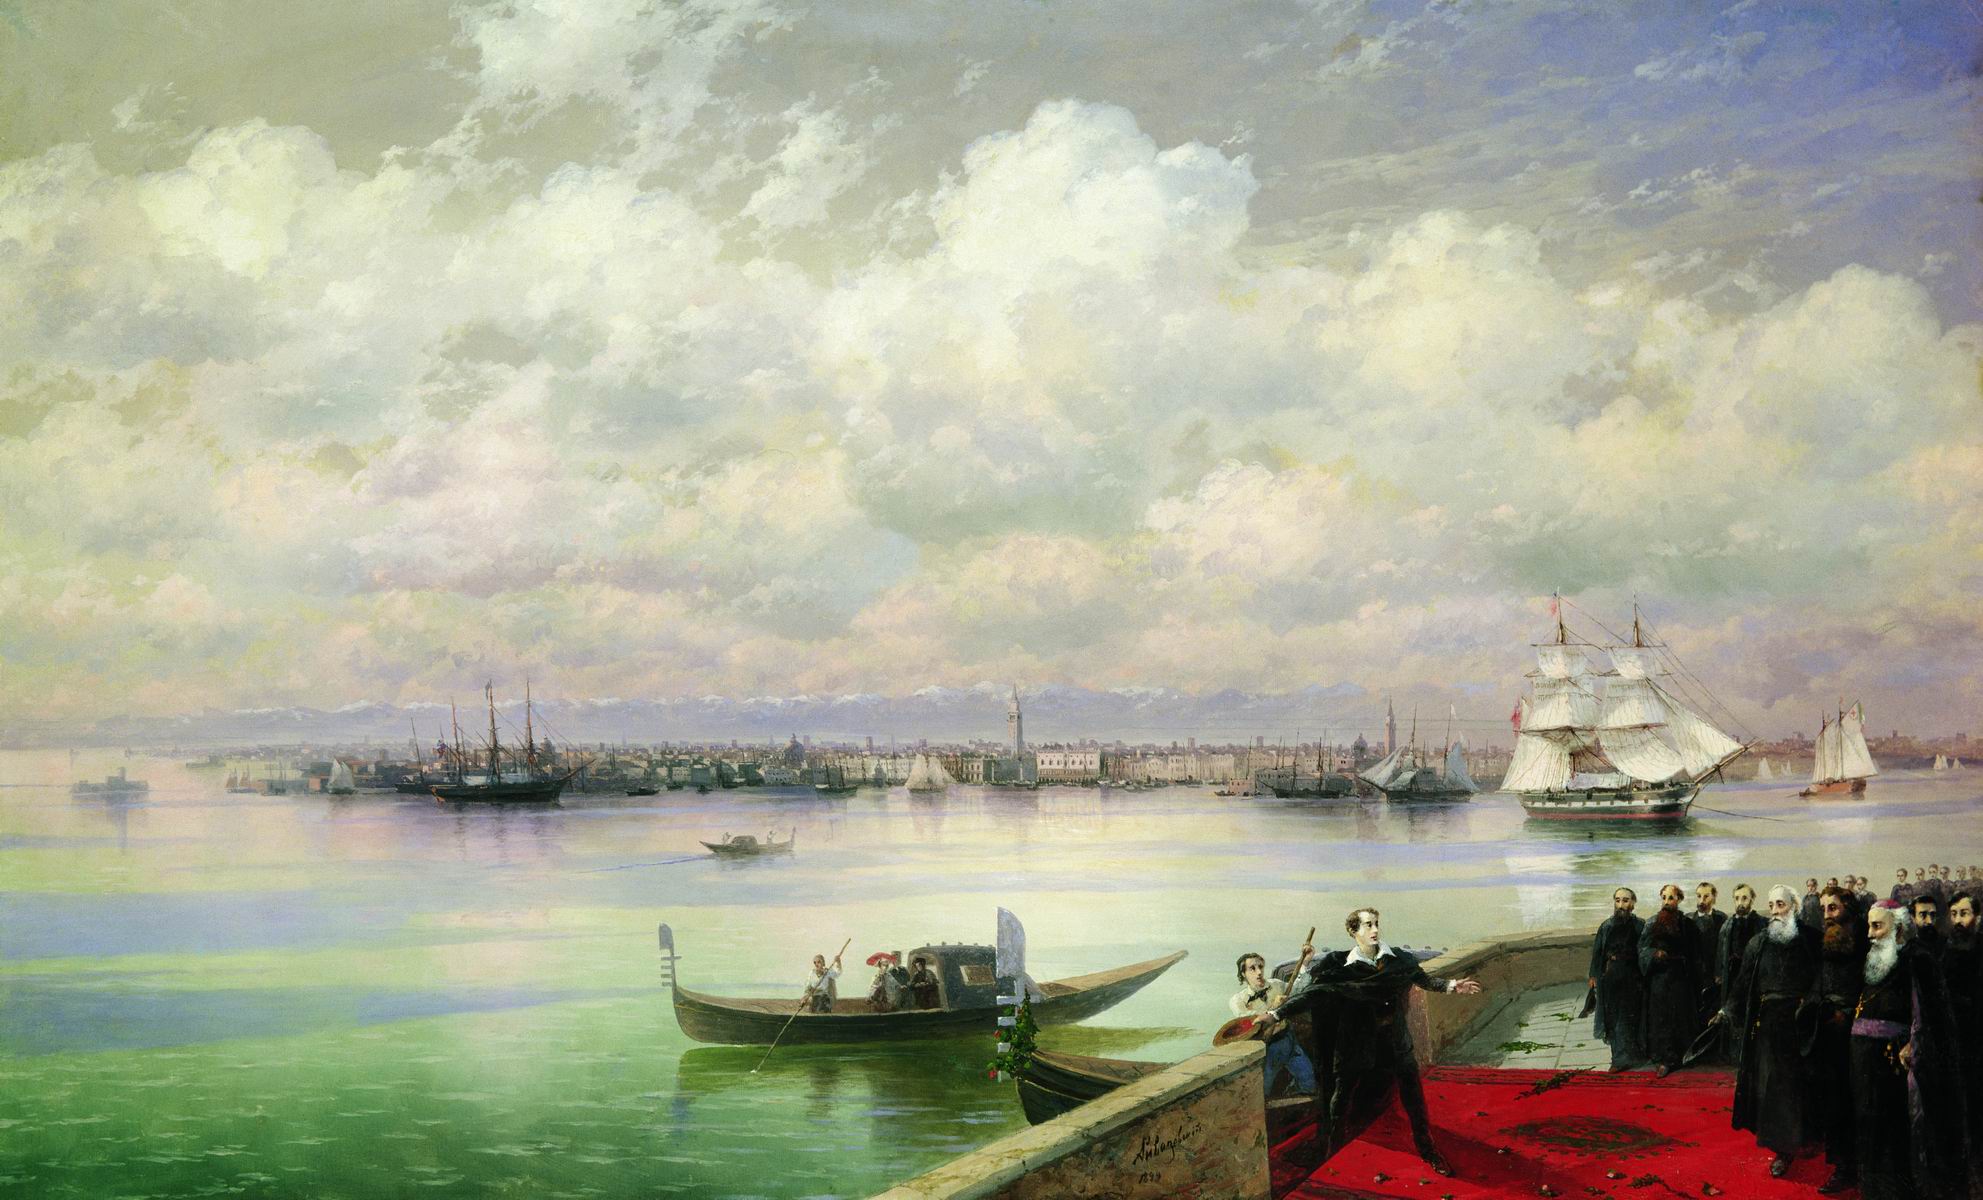 This impossibly romantic image of Lord Byron (poet) arriving on the Venetian island of San Lazzaro to be welcomed by the Armenian community there (Painting 1890s)